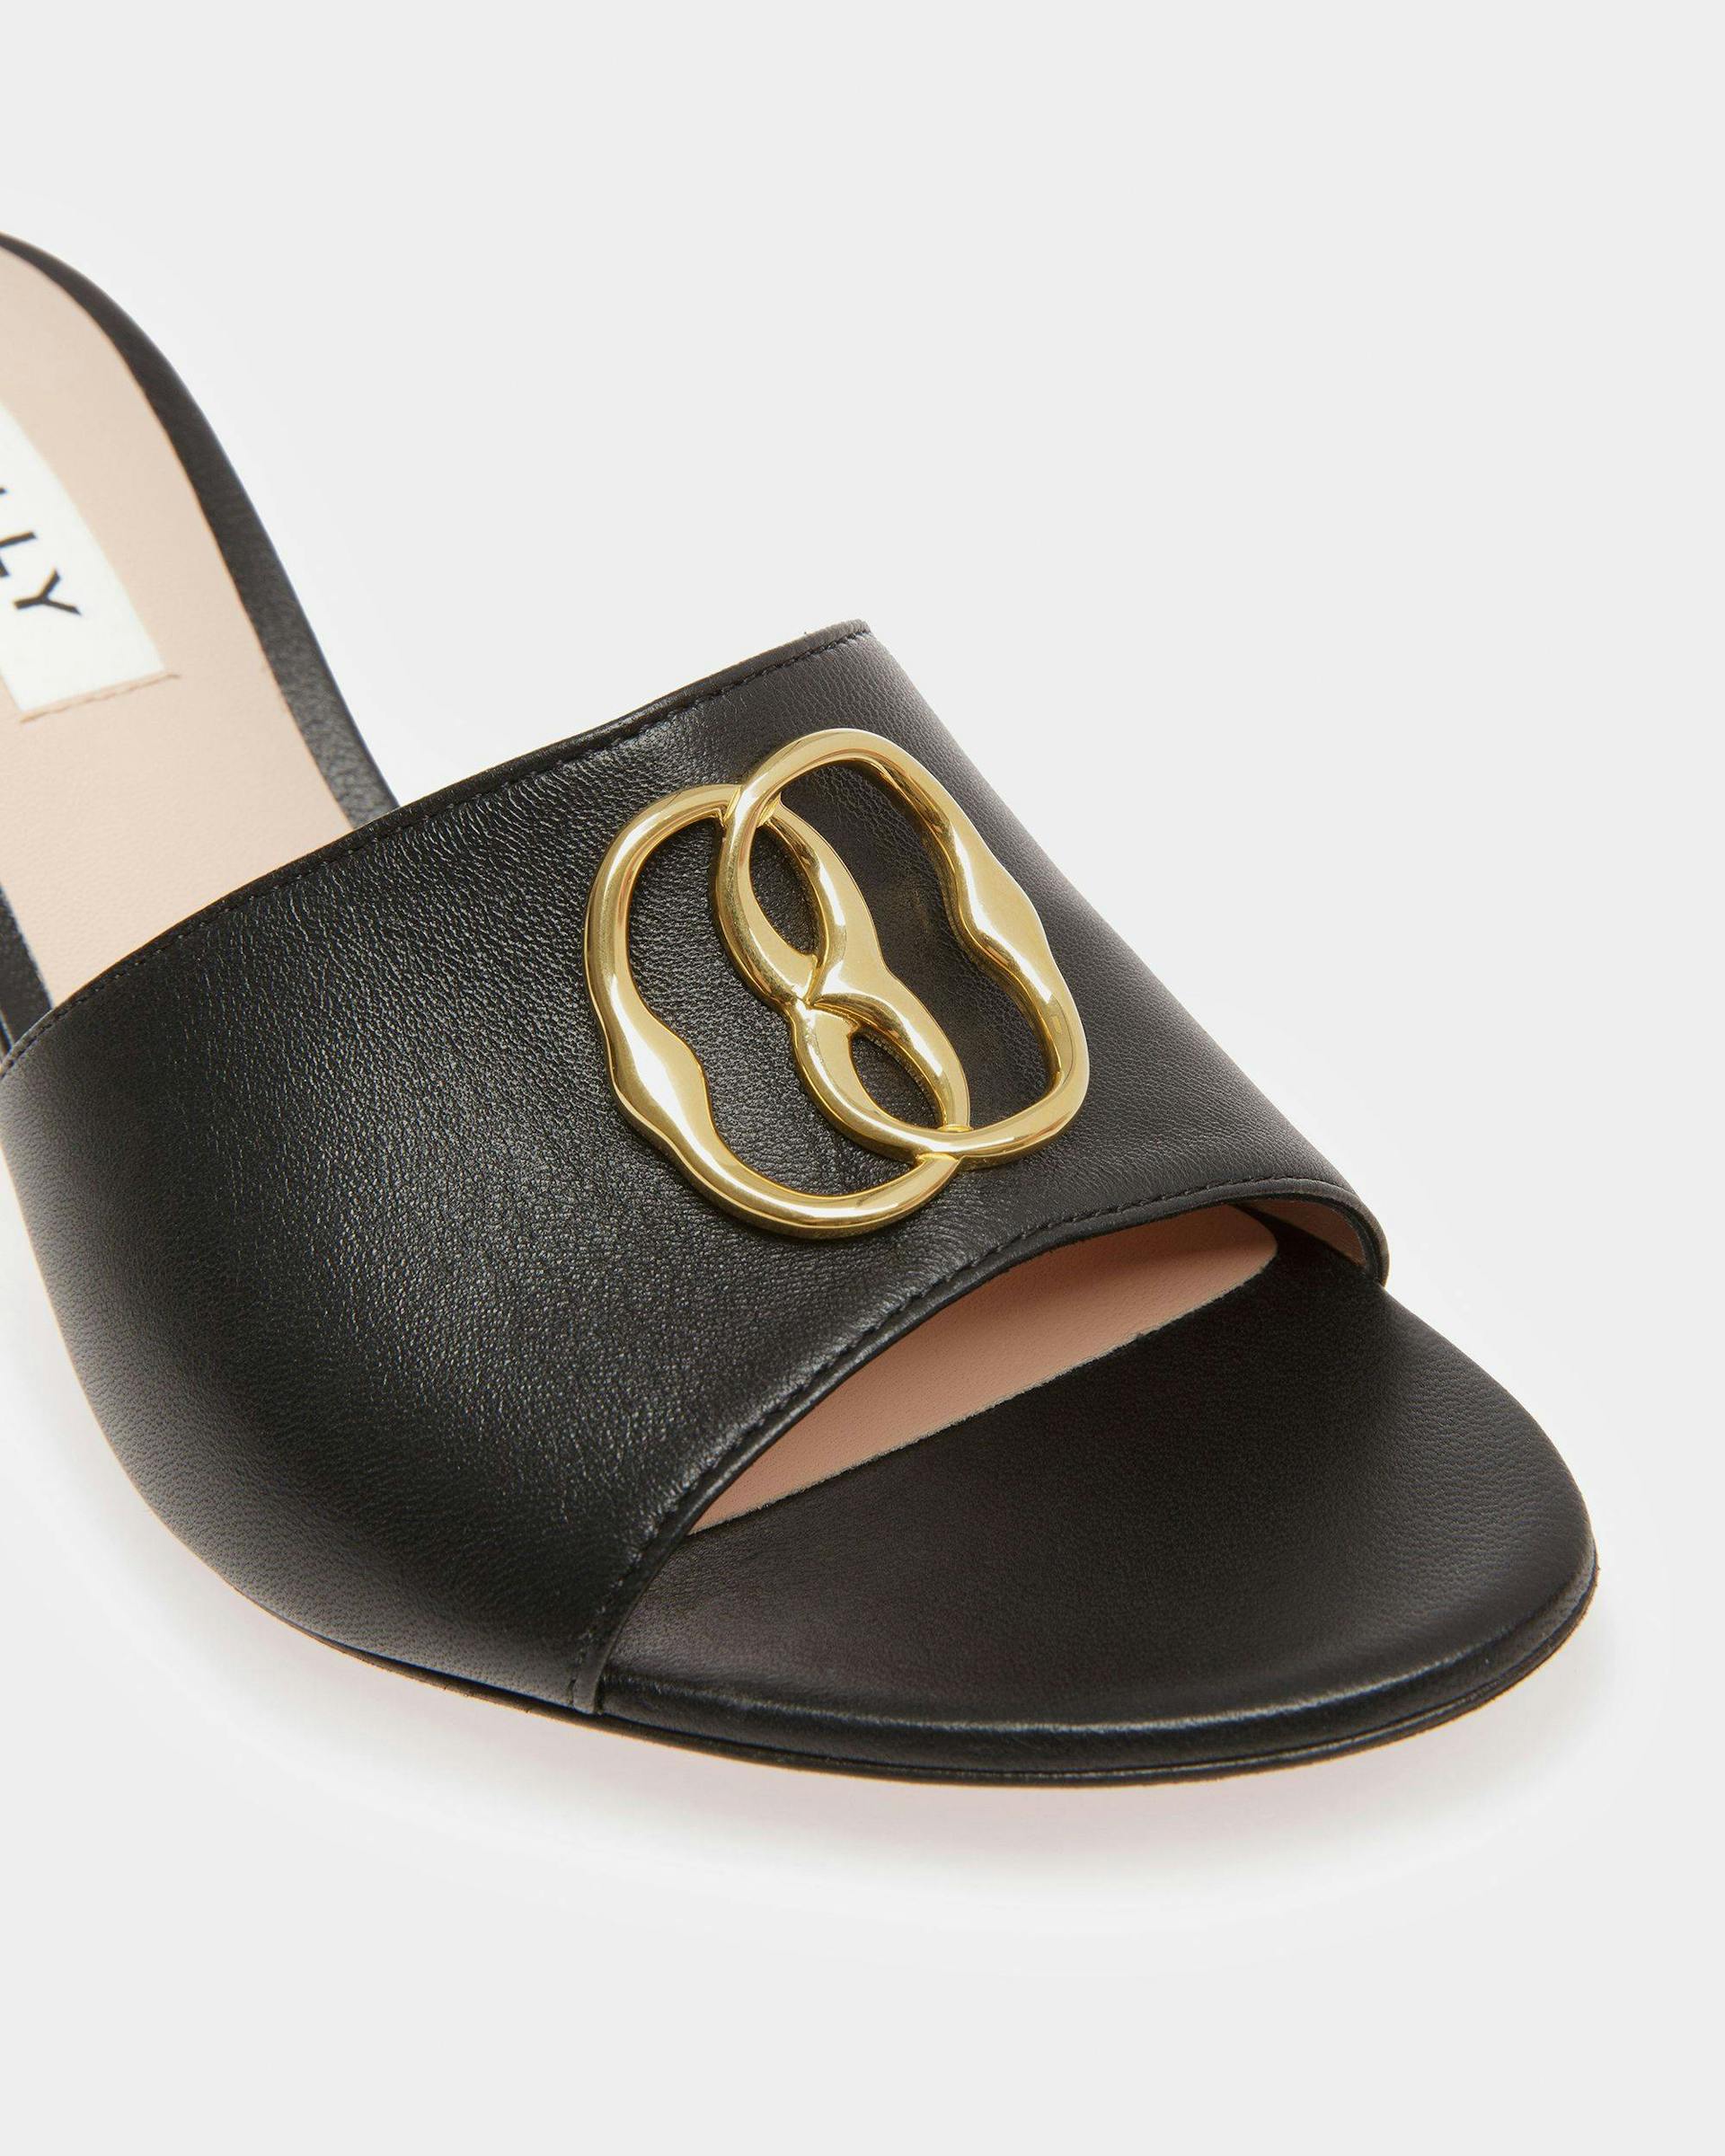 Emblem Sandals In Black Leather - Women's - Bally - 04